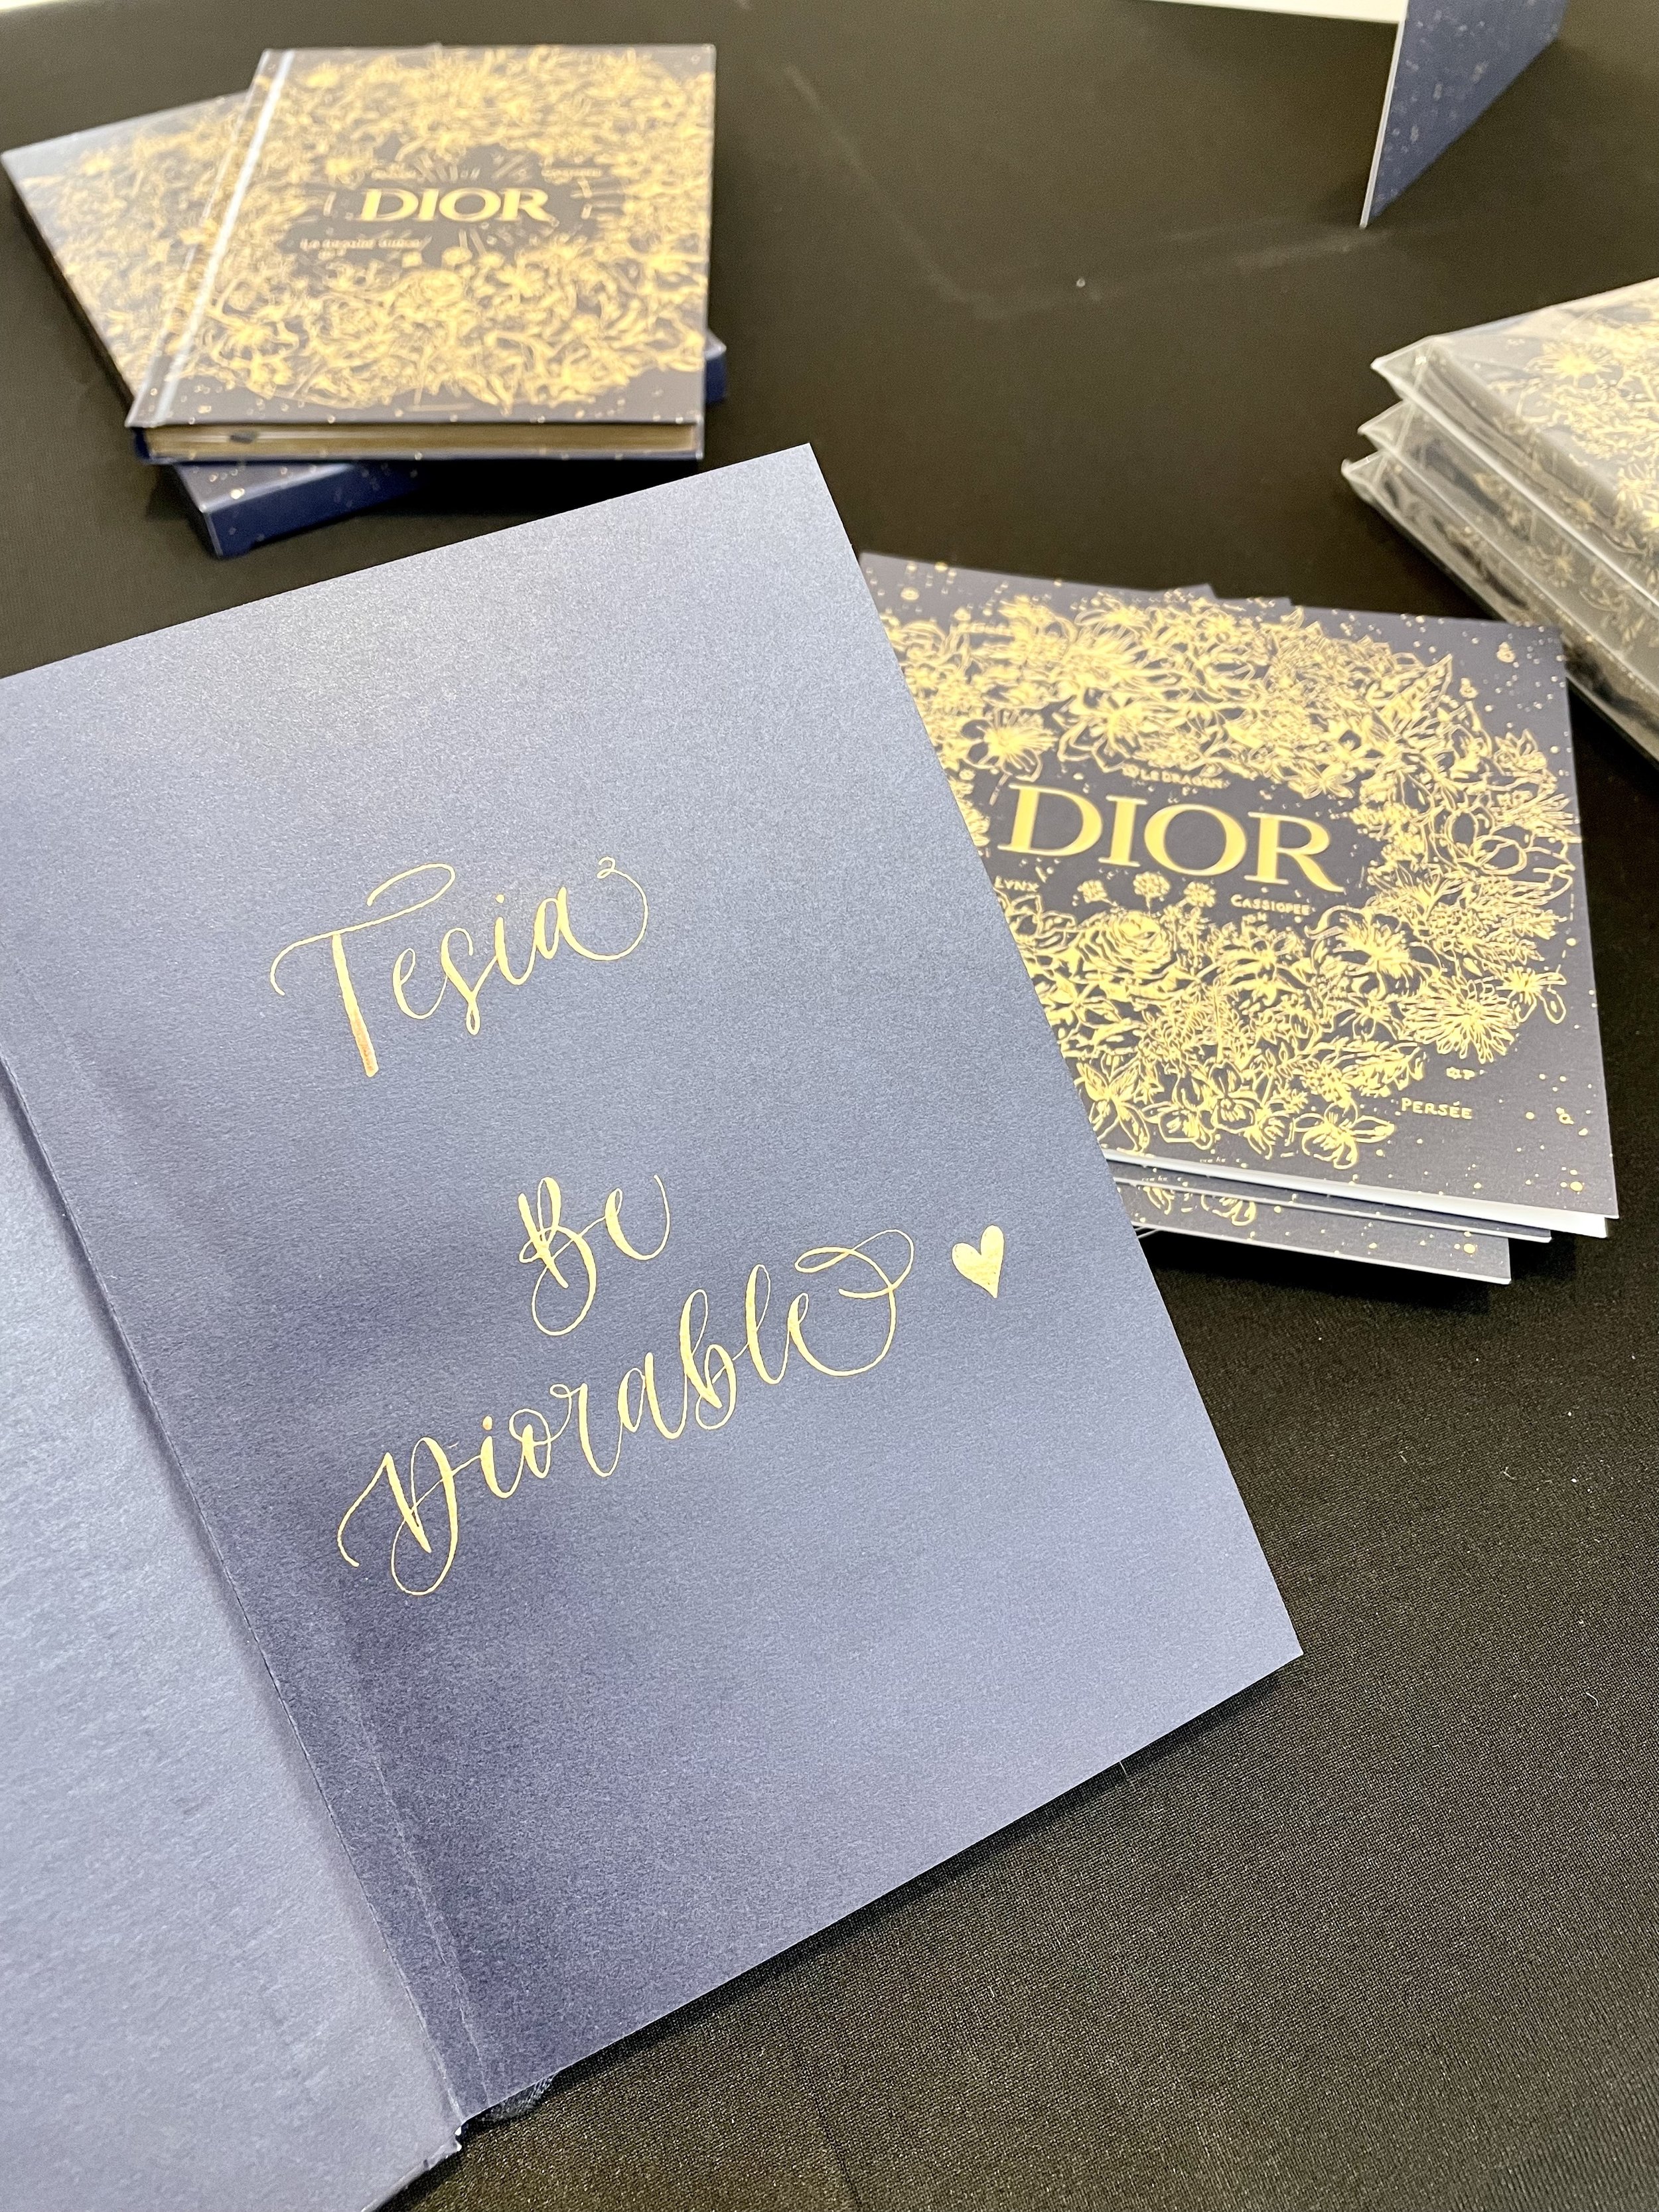 Live Calligraphy for Dior in Jacksonville FL — A Handful Of Letters